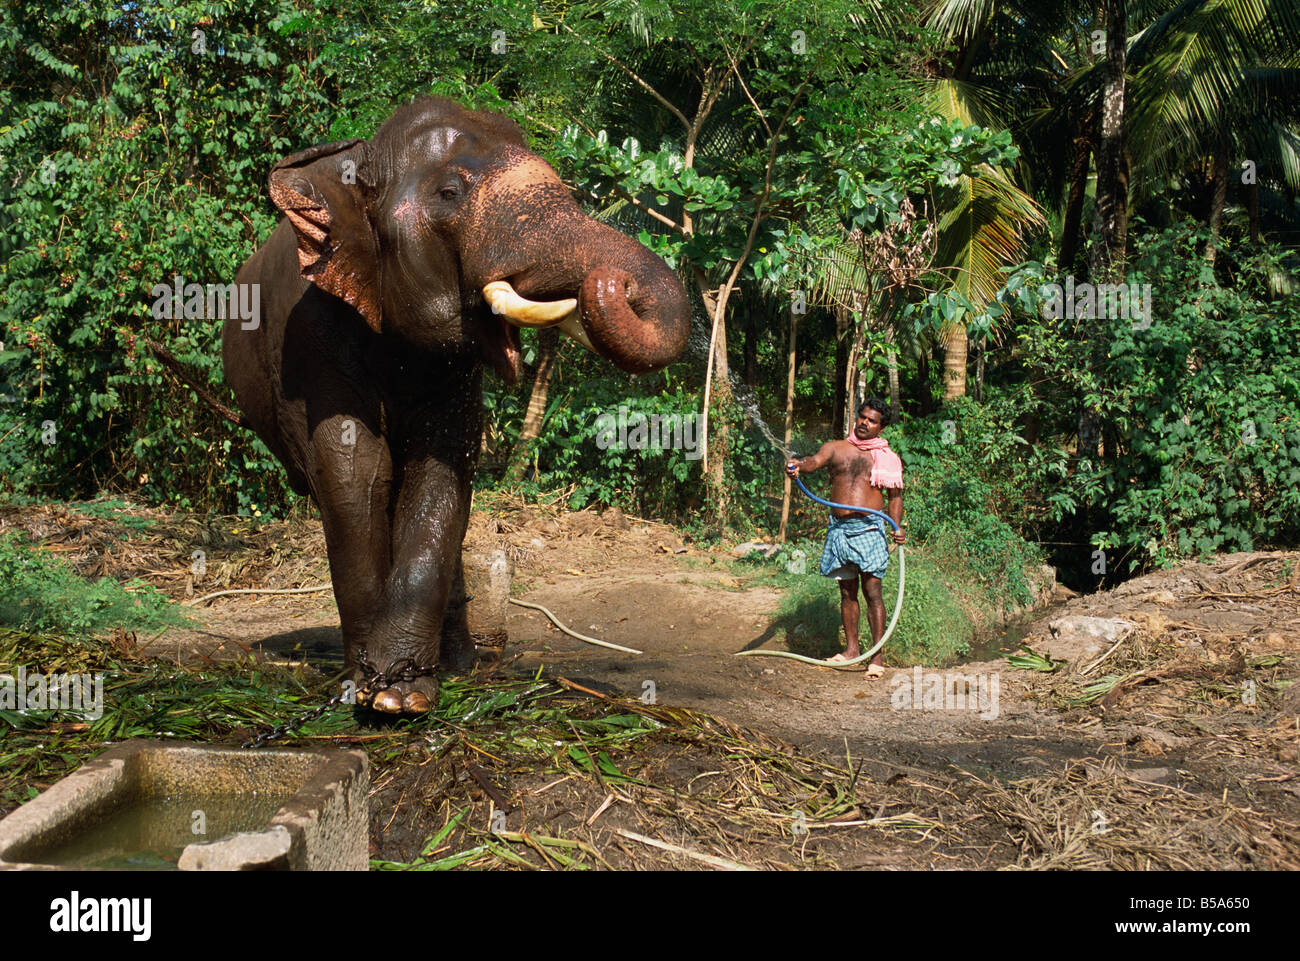 Punnathur Kotta Elephant Fort housing 50 Elephants and financed by the temples Kerala India R H Productions Stock Photo